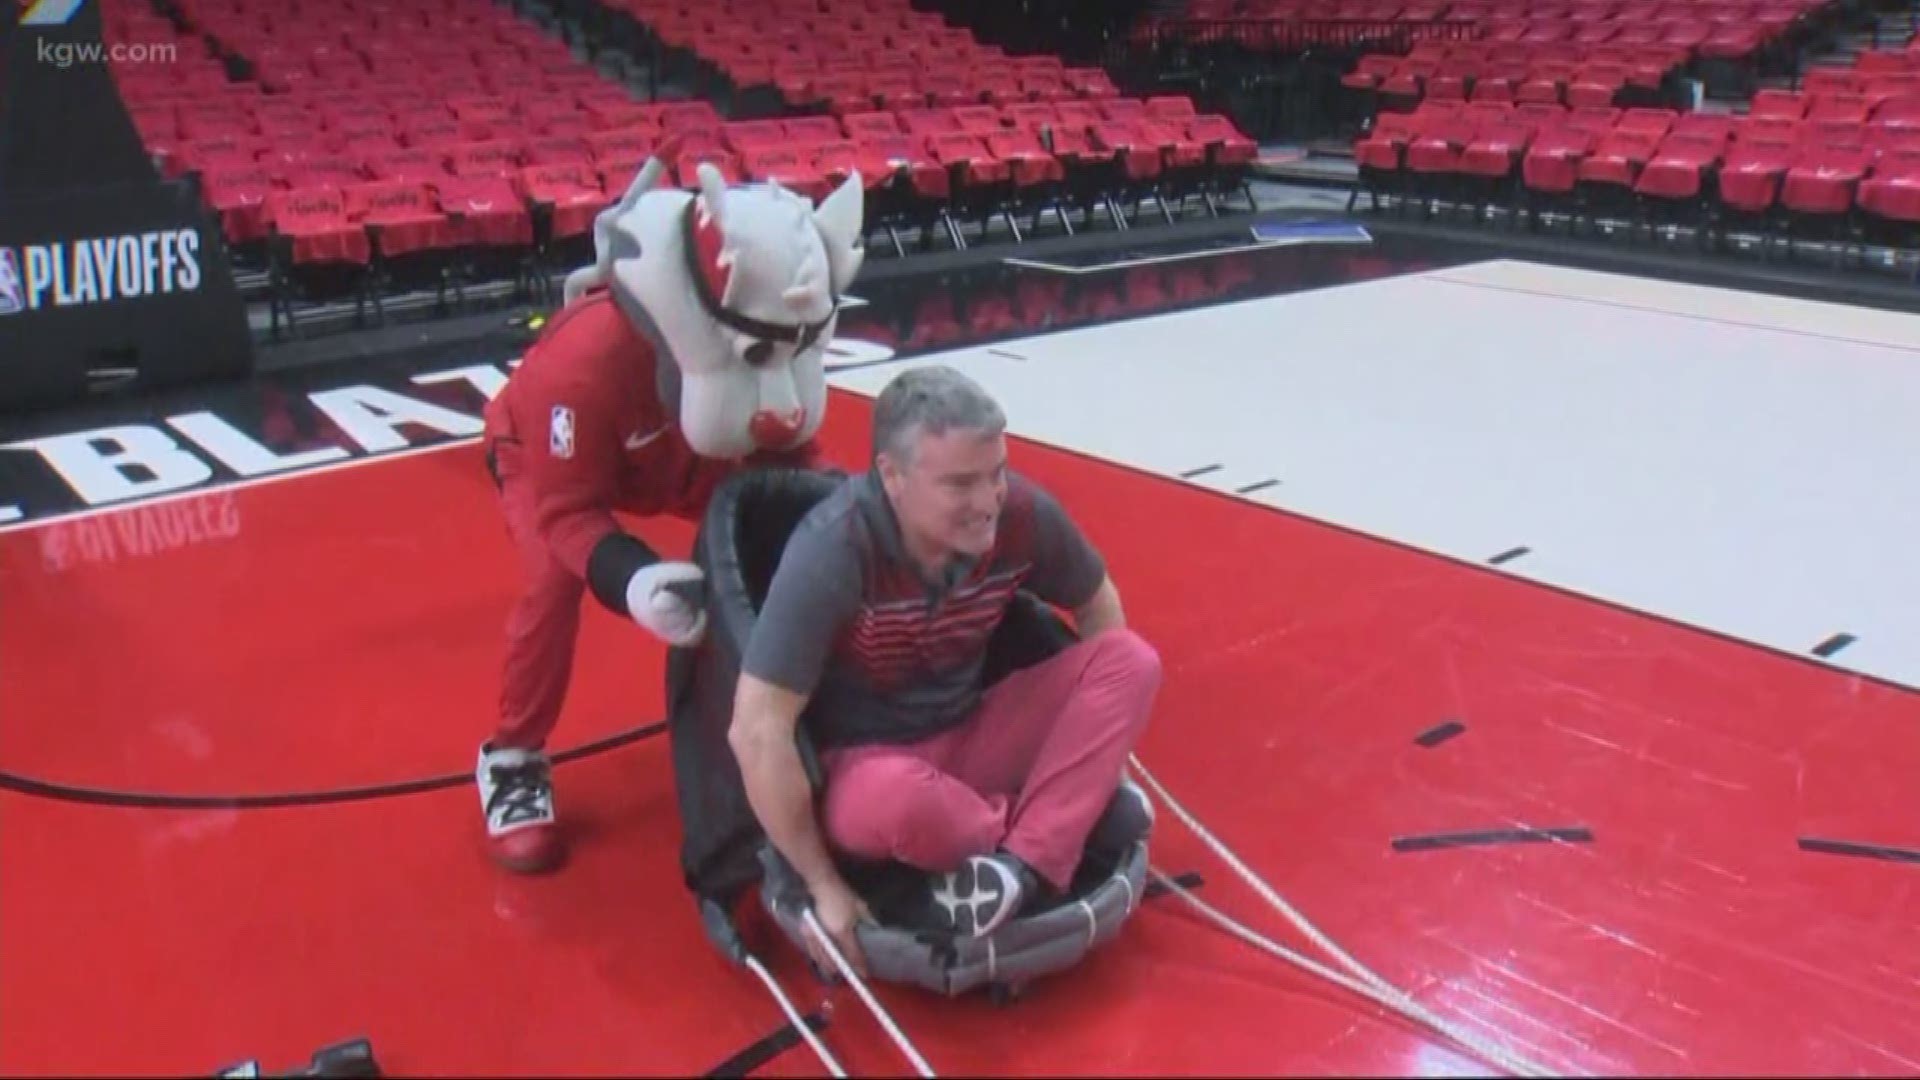 The Blazers play the Thunder in Game 2 of their first round playoffs. KGW reporter Tim Gordon experienced one of the iconic stunts fans see during the game